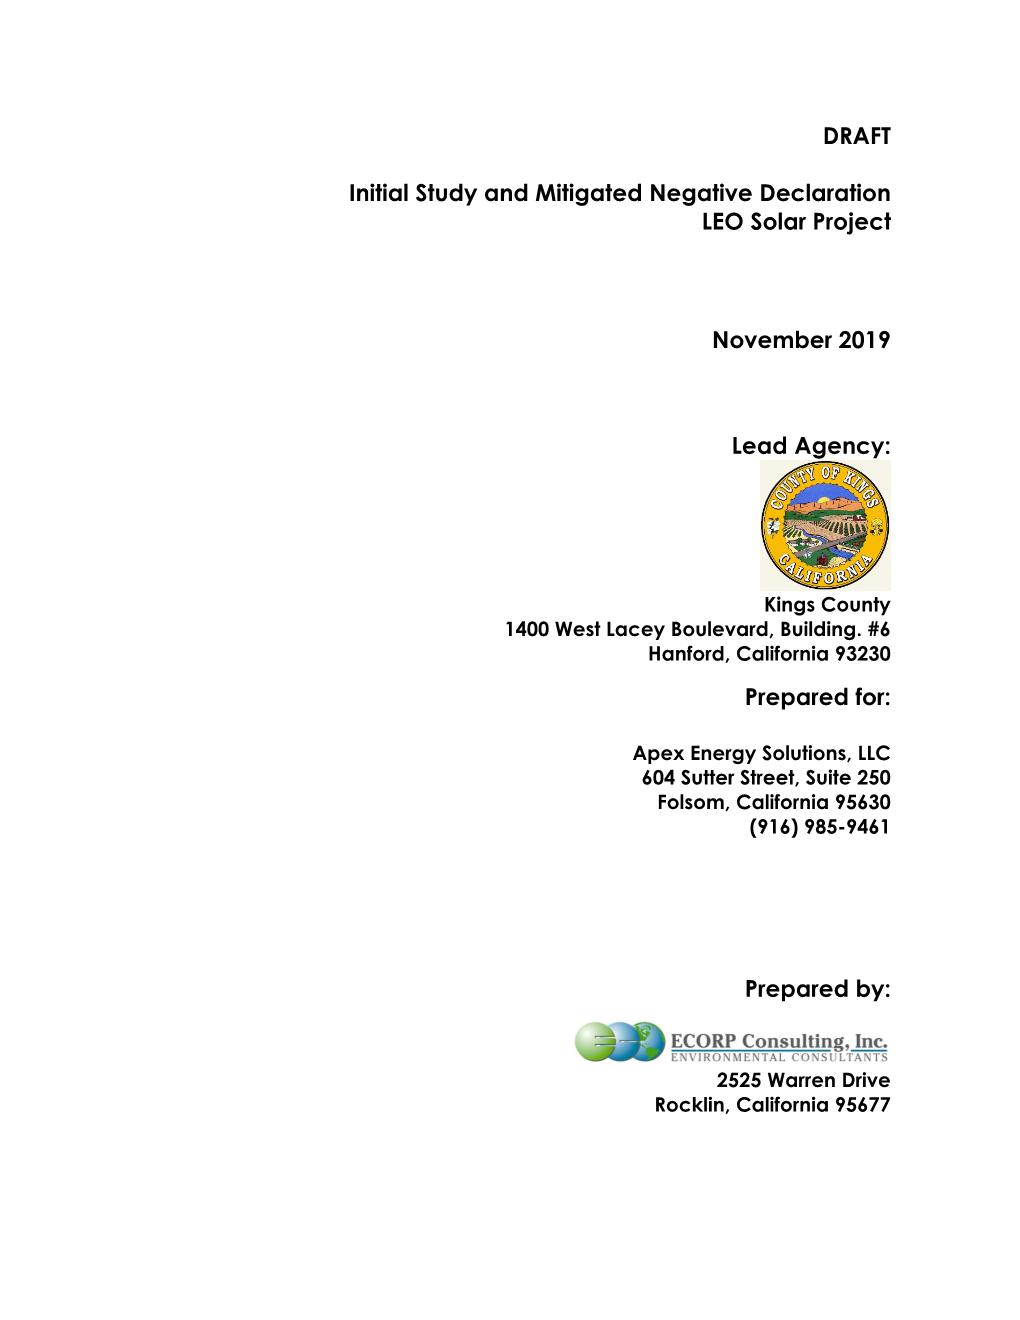 Draft Initial Study and Mitigated Negative Declaration Leo Solar Project